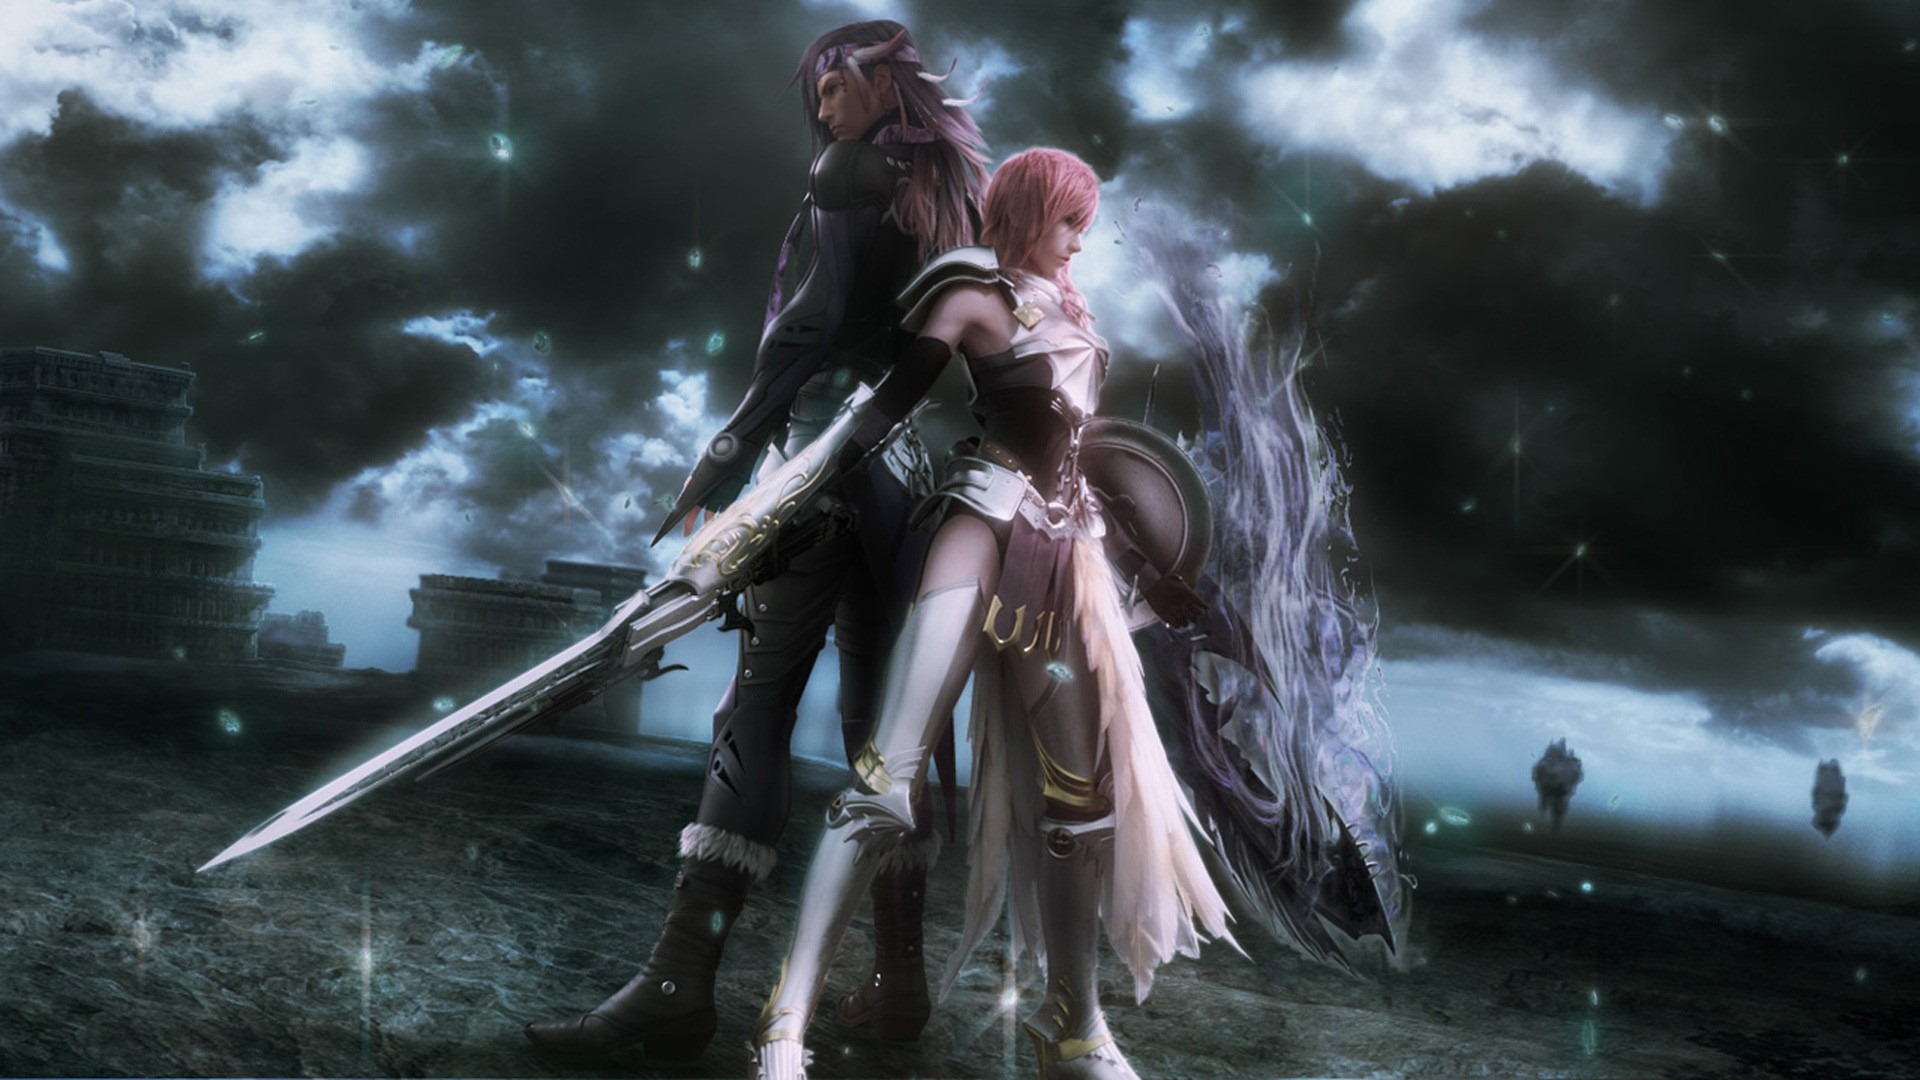 Free Download Final Fantasy Xiii 2 Wallpapers Downloads Inmotion Gaming 19x1080 For Your Desktop Mobile Tablet Explore 50 Ffxi Wallpaper Hd Final Fantasy 13 Wallpaper Hd Final Fantasy 7 Wallpapers Final Fantasy 10 Wallpaper